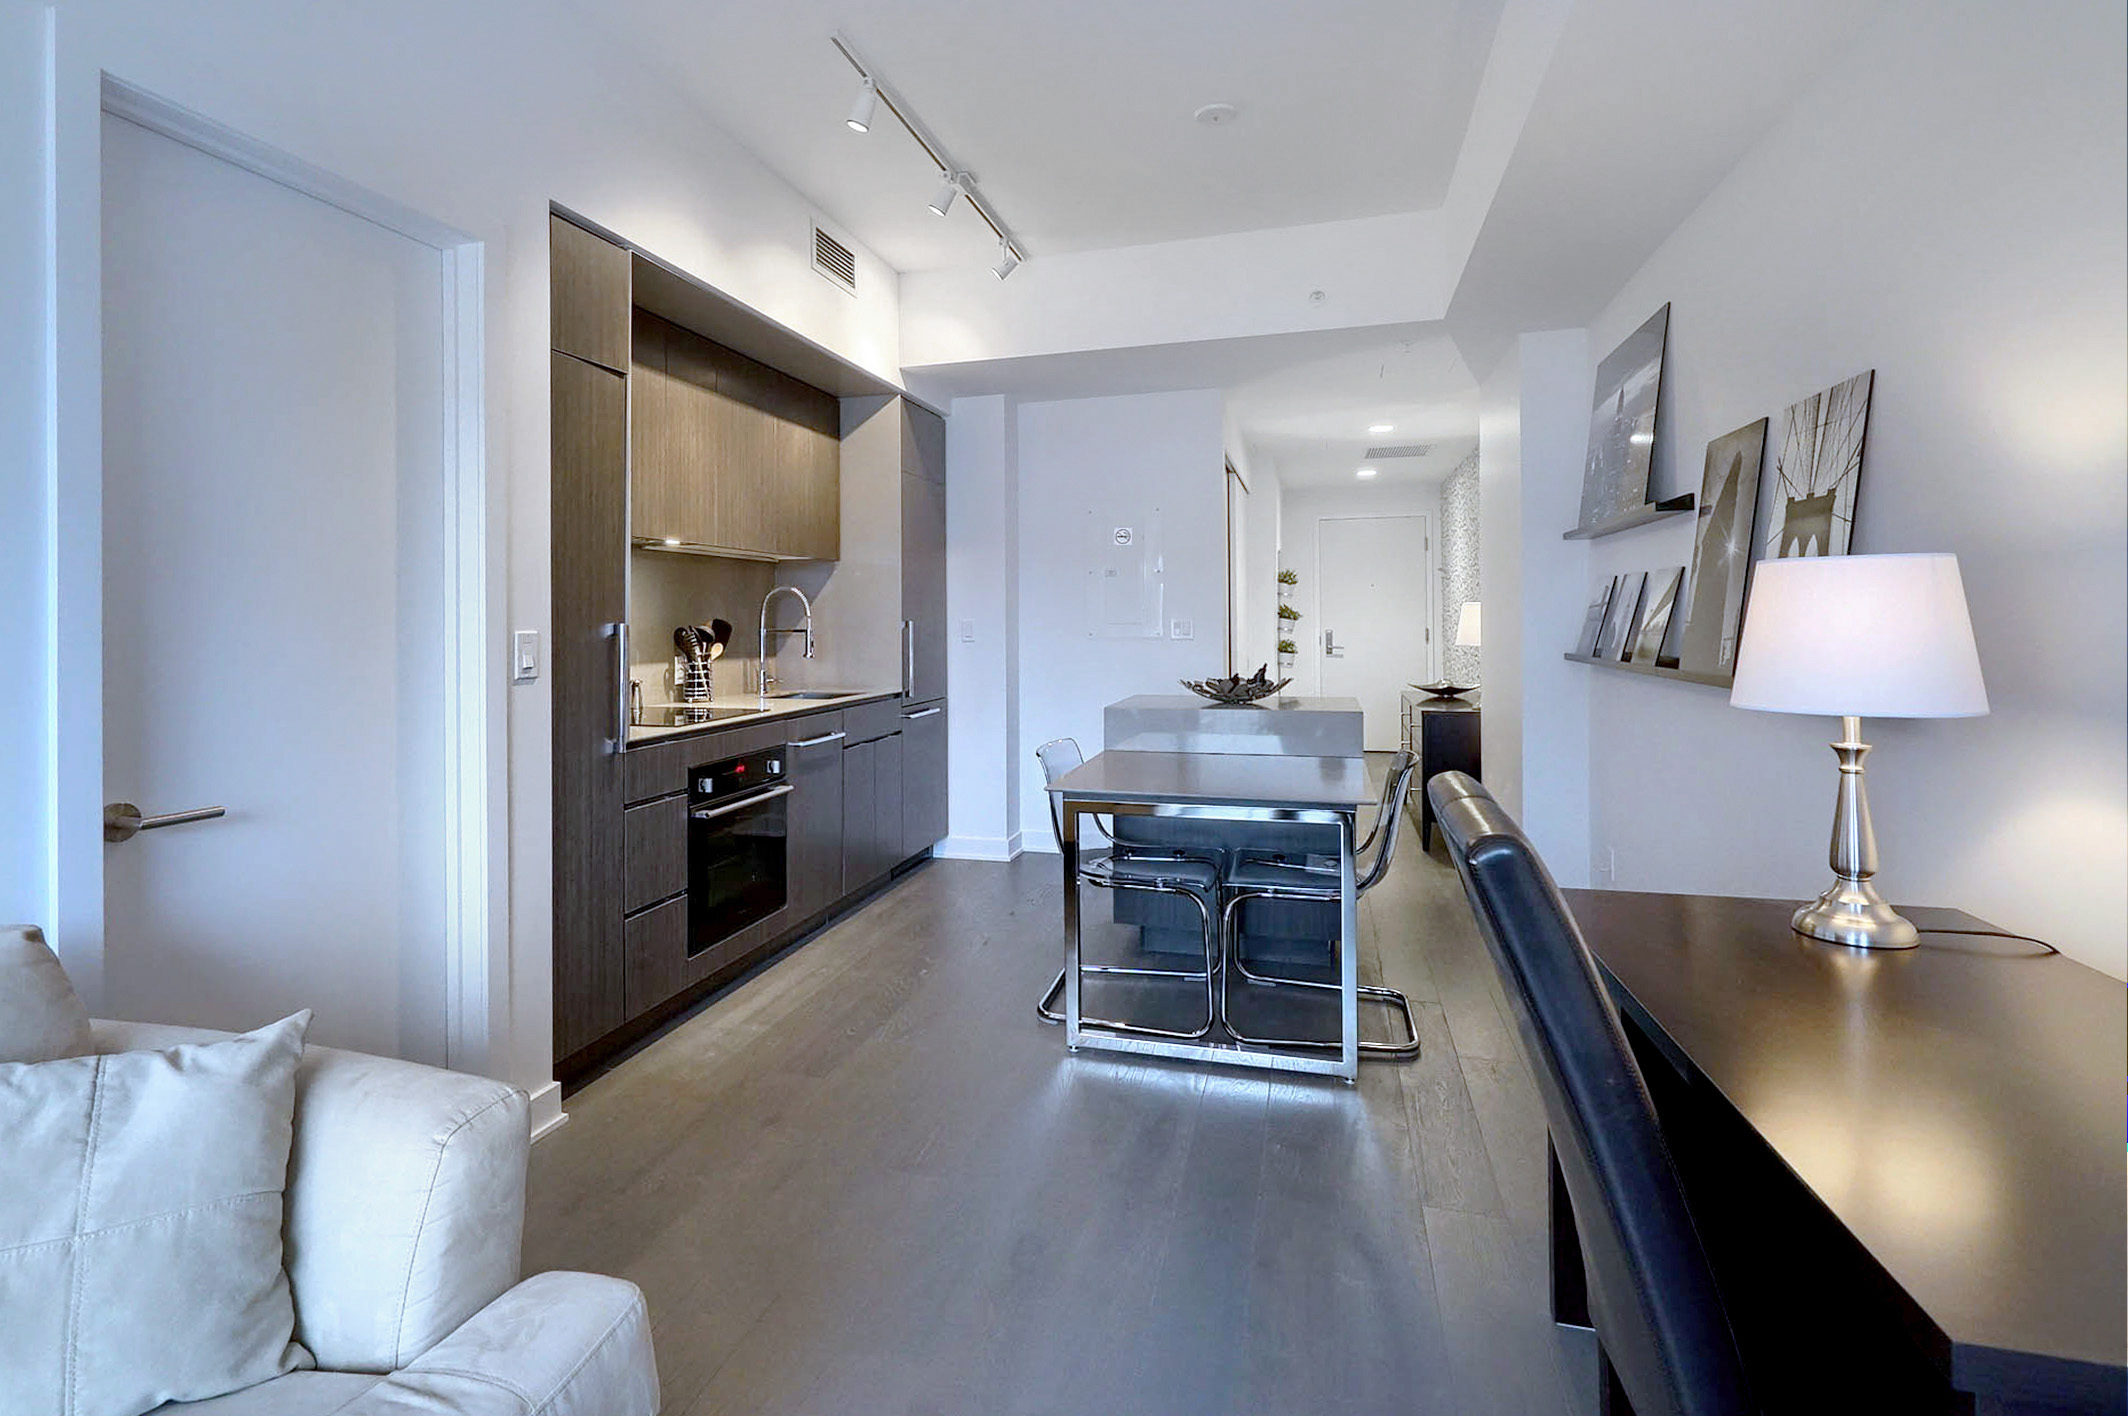 Wide view of the entire kitchen of this furnished executive housing apartment in Montreal. Beautiful, sleek cabinetry, darker wood flooring, plus office space to work comfortably from home